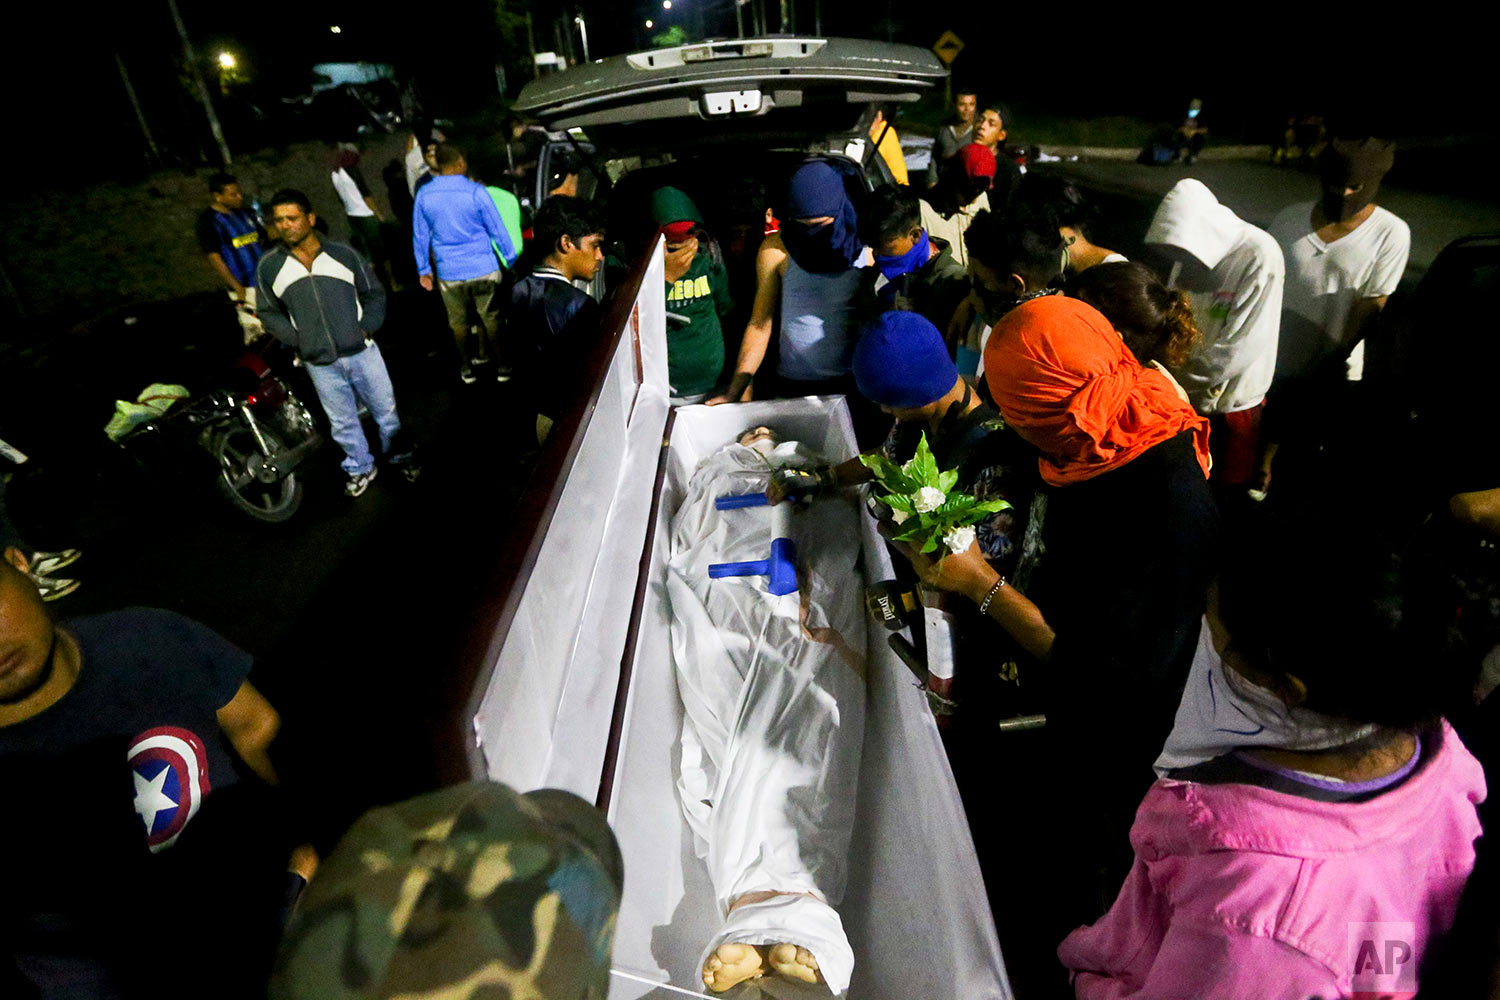  The body of 19-year-old Chester Chavarria is surrounded by his friends outside the Autonomous University of Nicaragua, in Managua, June 8, 2018. Chavarria died after being shot several times while guarding a barricade during a protest against the go